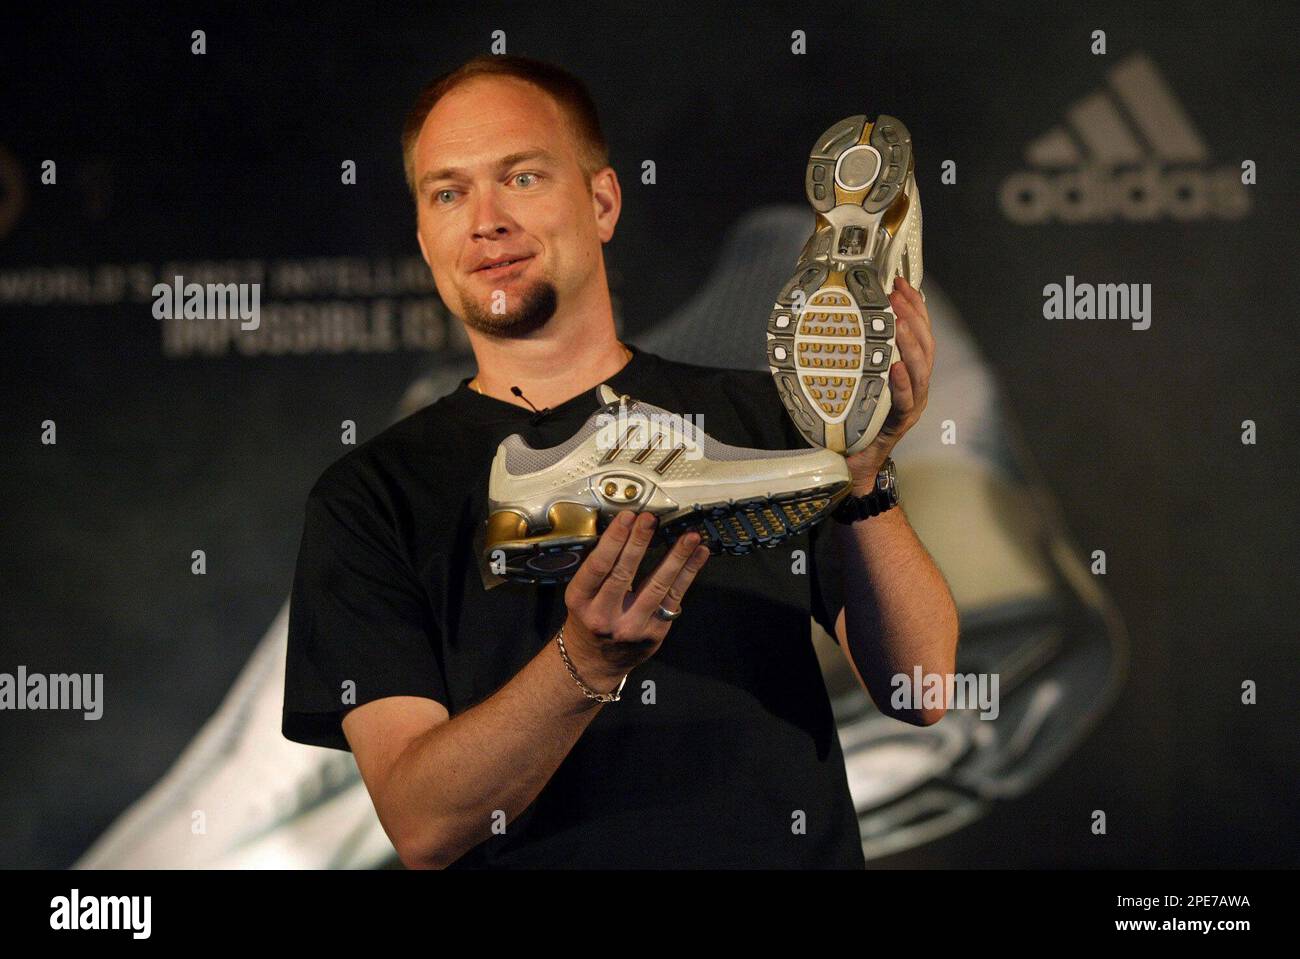 RETRANSMISSION WITH ADDITIONAL INFORMATION **Andreas Gellner, Managing Director  Adidas India Marketing Poses For The Media With The Adidas-1 Shoes During  The Launch In India, In New Delhi, Wednesday, April |  colegioclubuniversitario.edu.ar